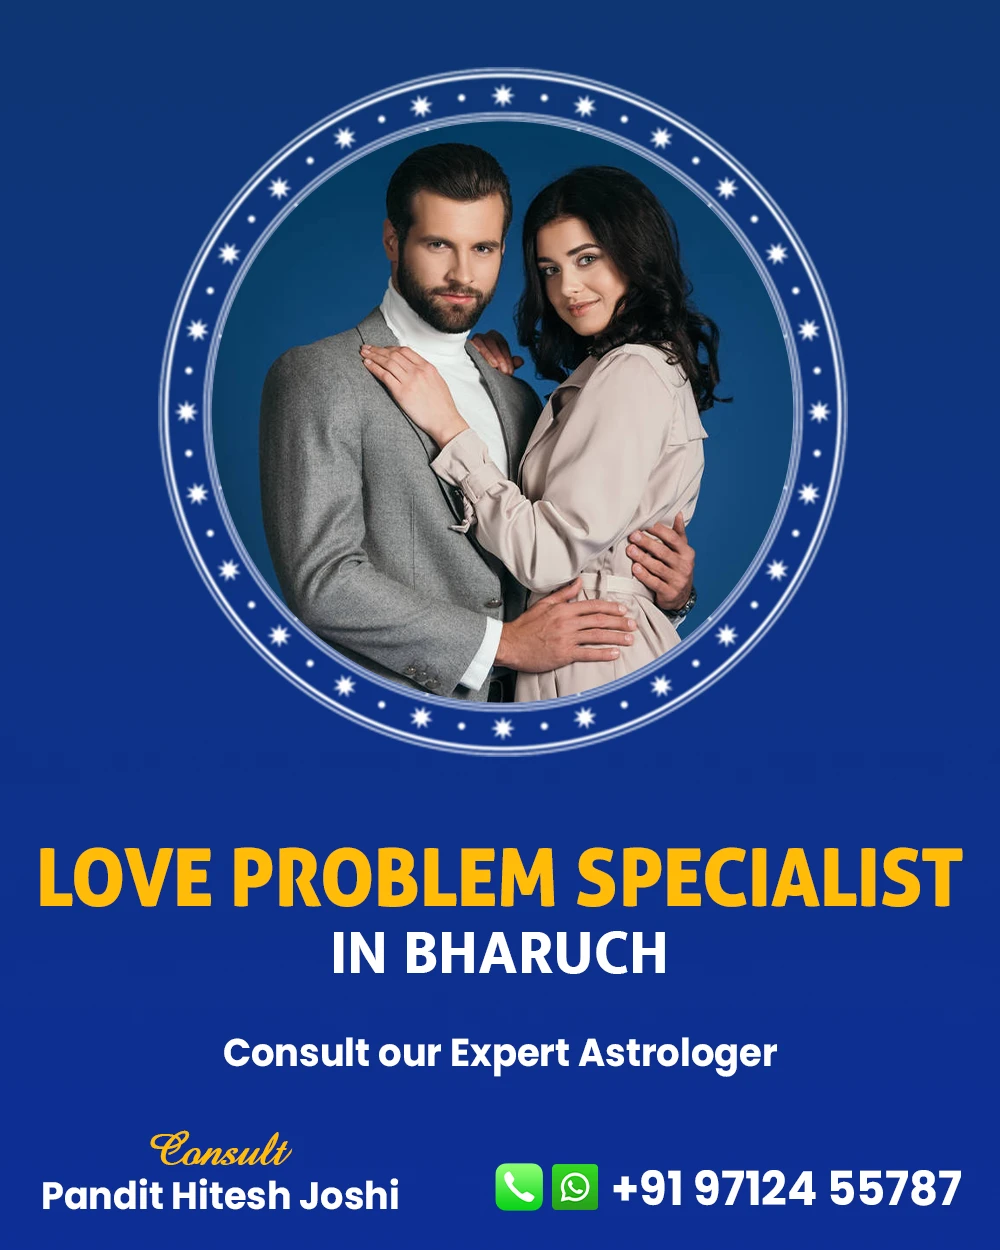 Love Problem Specialist in Bharuch